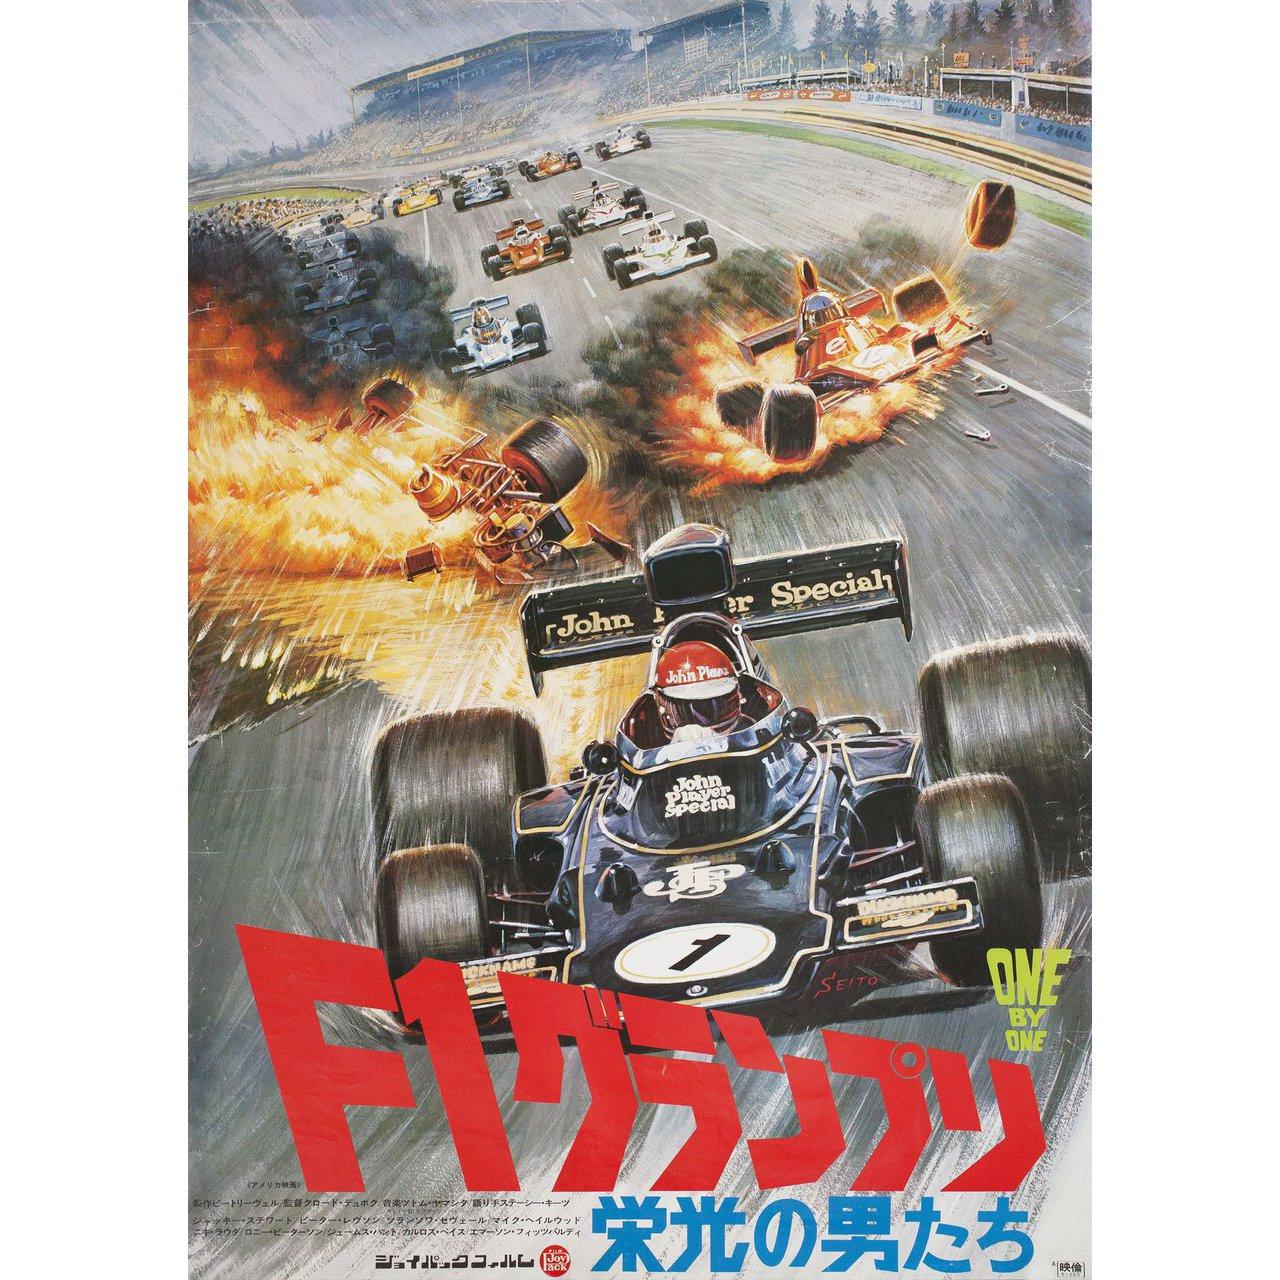 Original 1976 Japanese B2 poster for the documentary film One by One directed by Claude Du Boc with Francois Cevert / Mike Hailwood / Stacy Keach / Niki Lauda. Very good condition, rolled with tiny wrinkles. Please note: the size is stated in inches